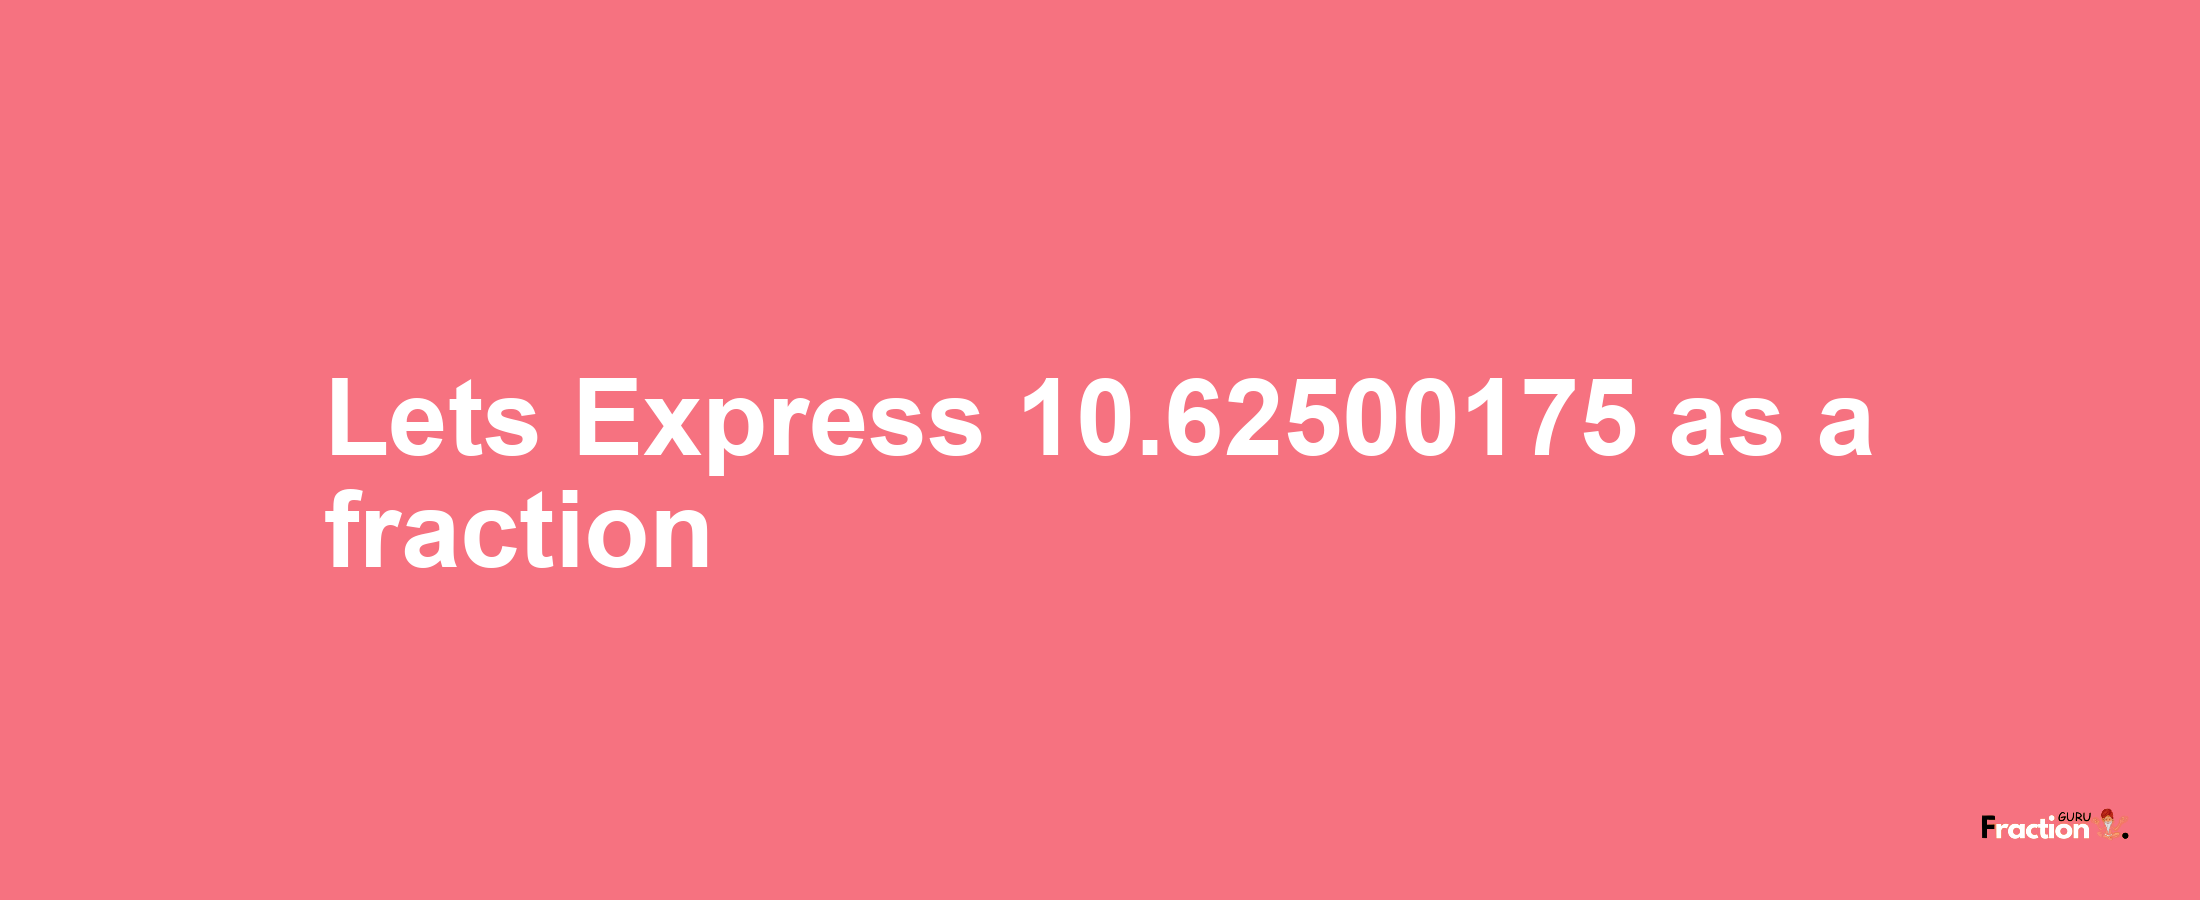 Lets Express 10.62500175 as afraction